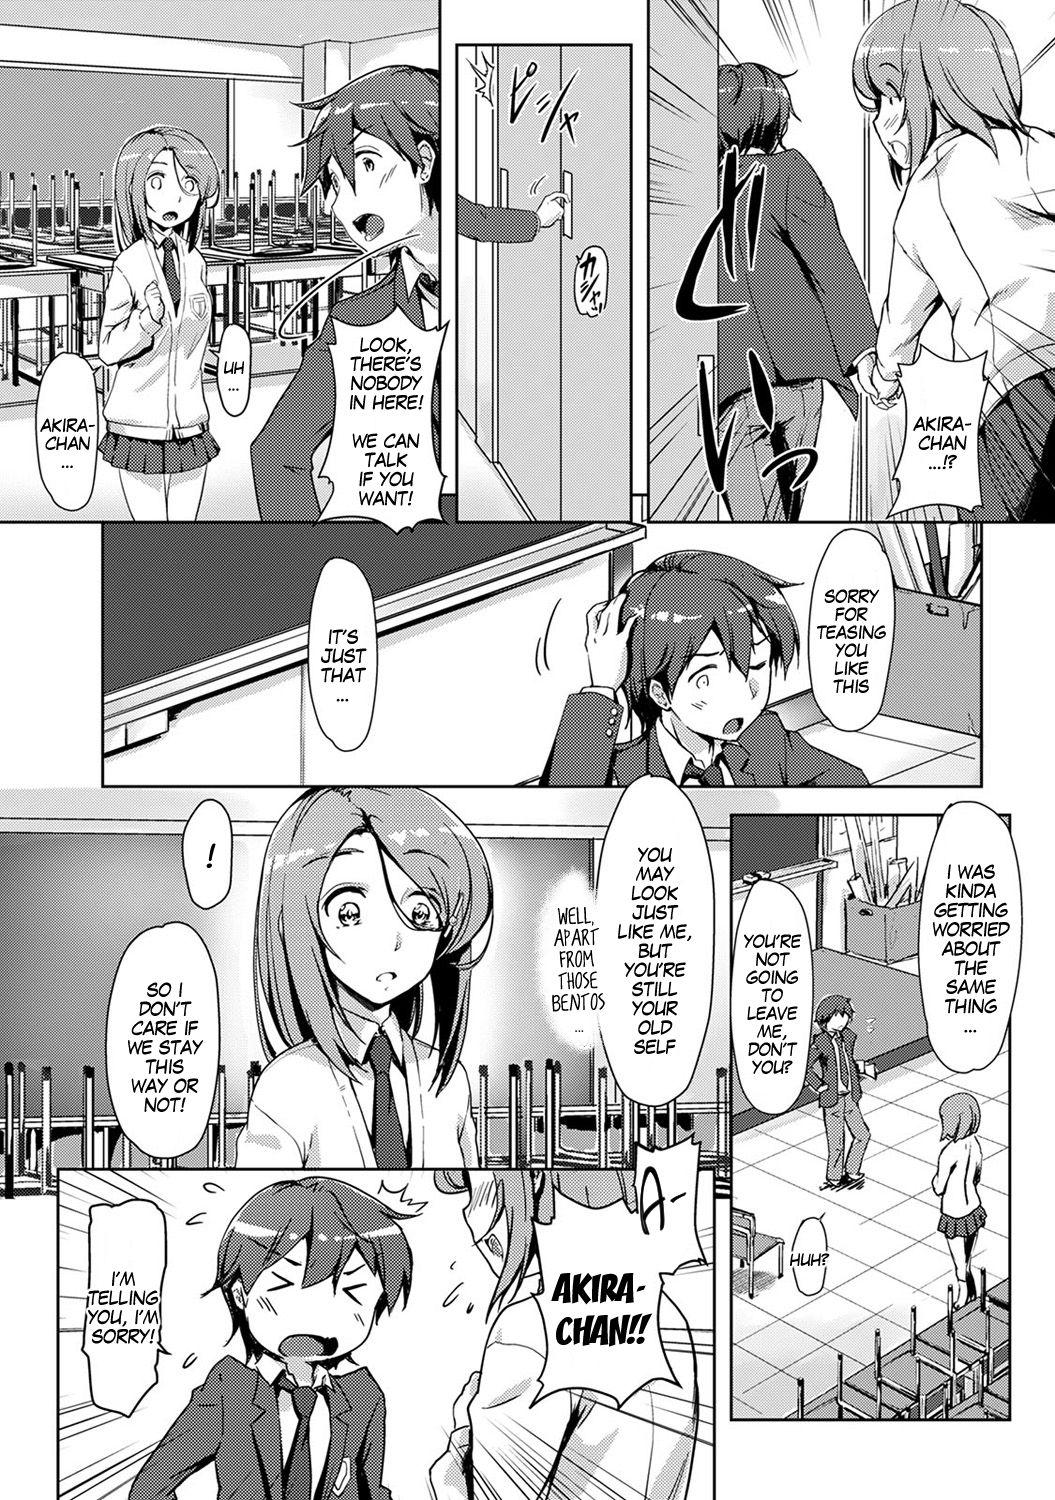 Exgirlfriend Ecchi Shitara Irekawacchatta!? | We Switched Our Bodies After Having Sex!? Ch. 3 Tan - Page 10